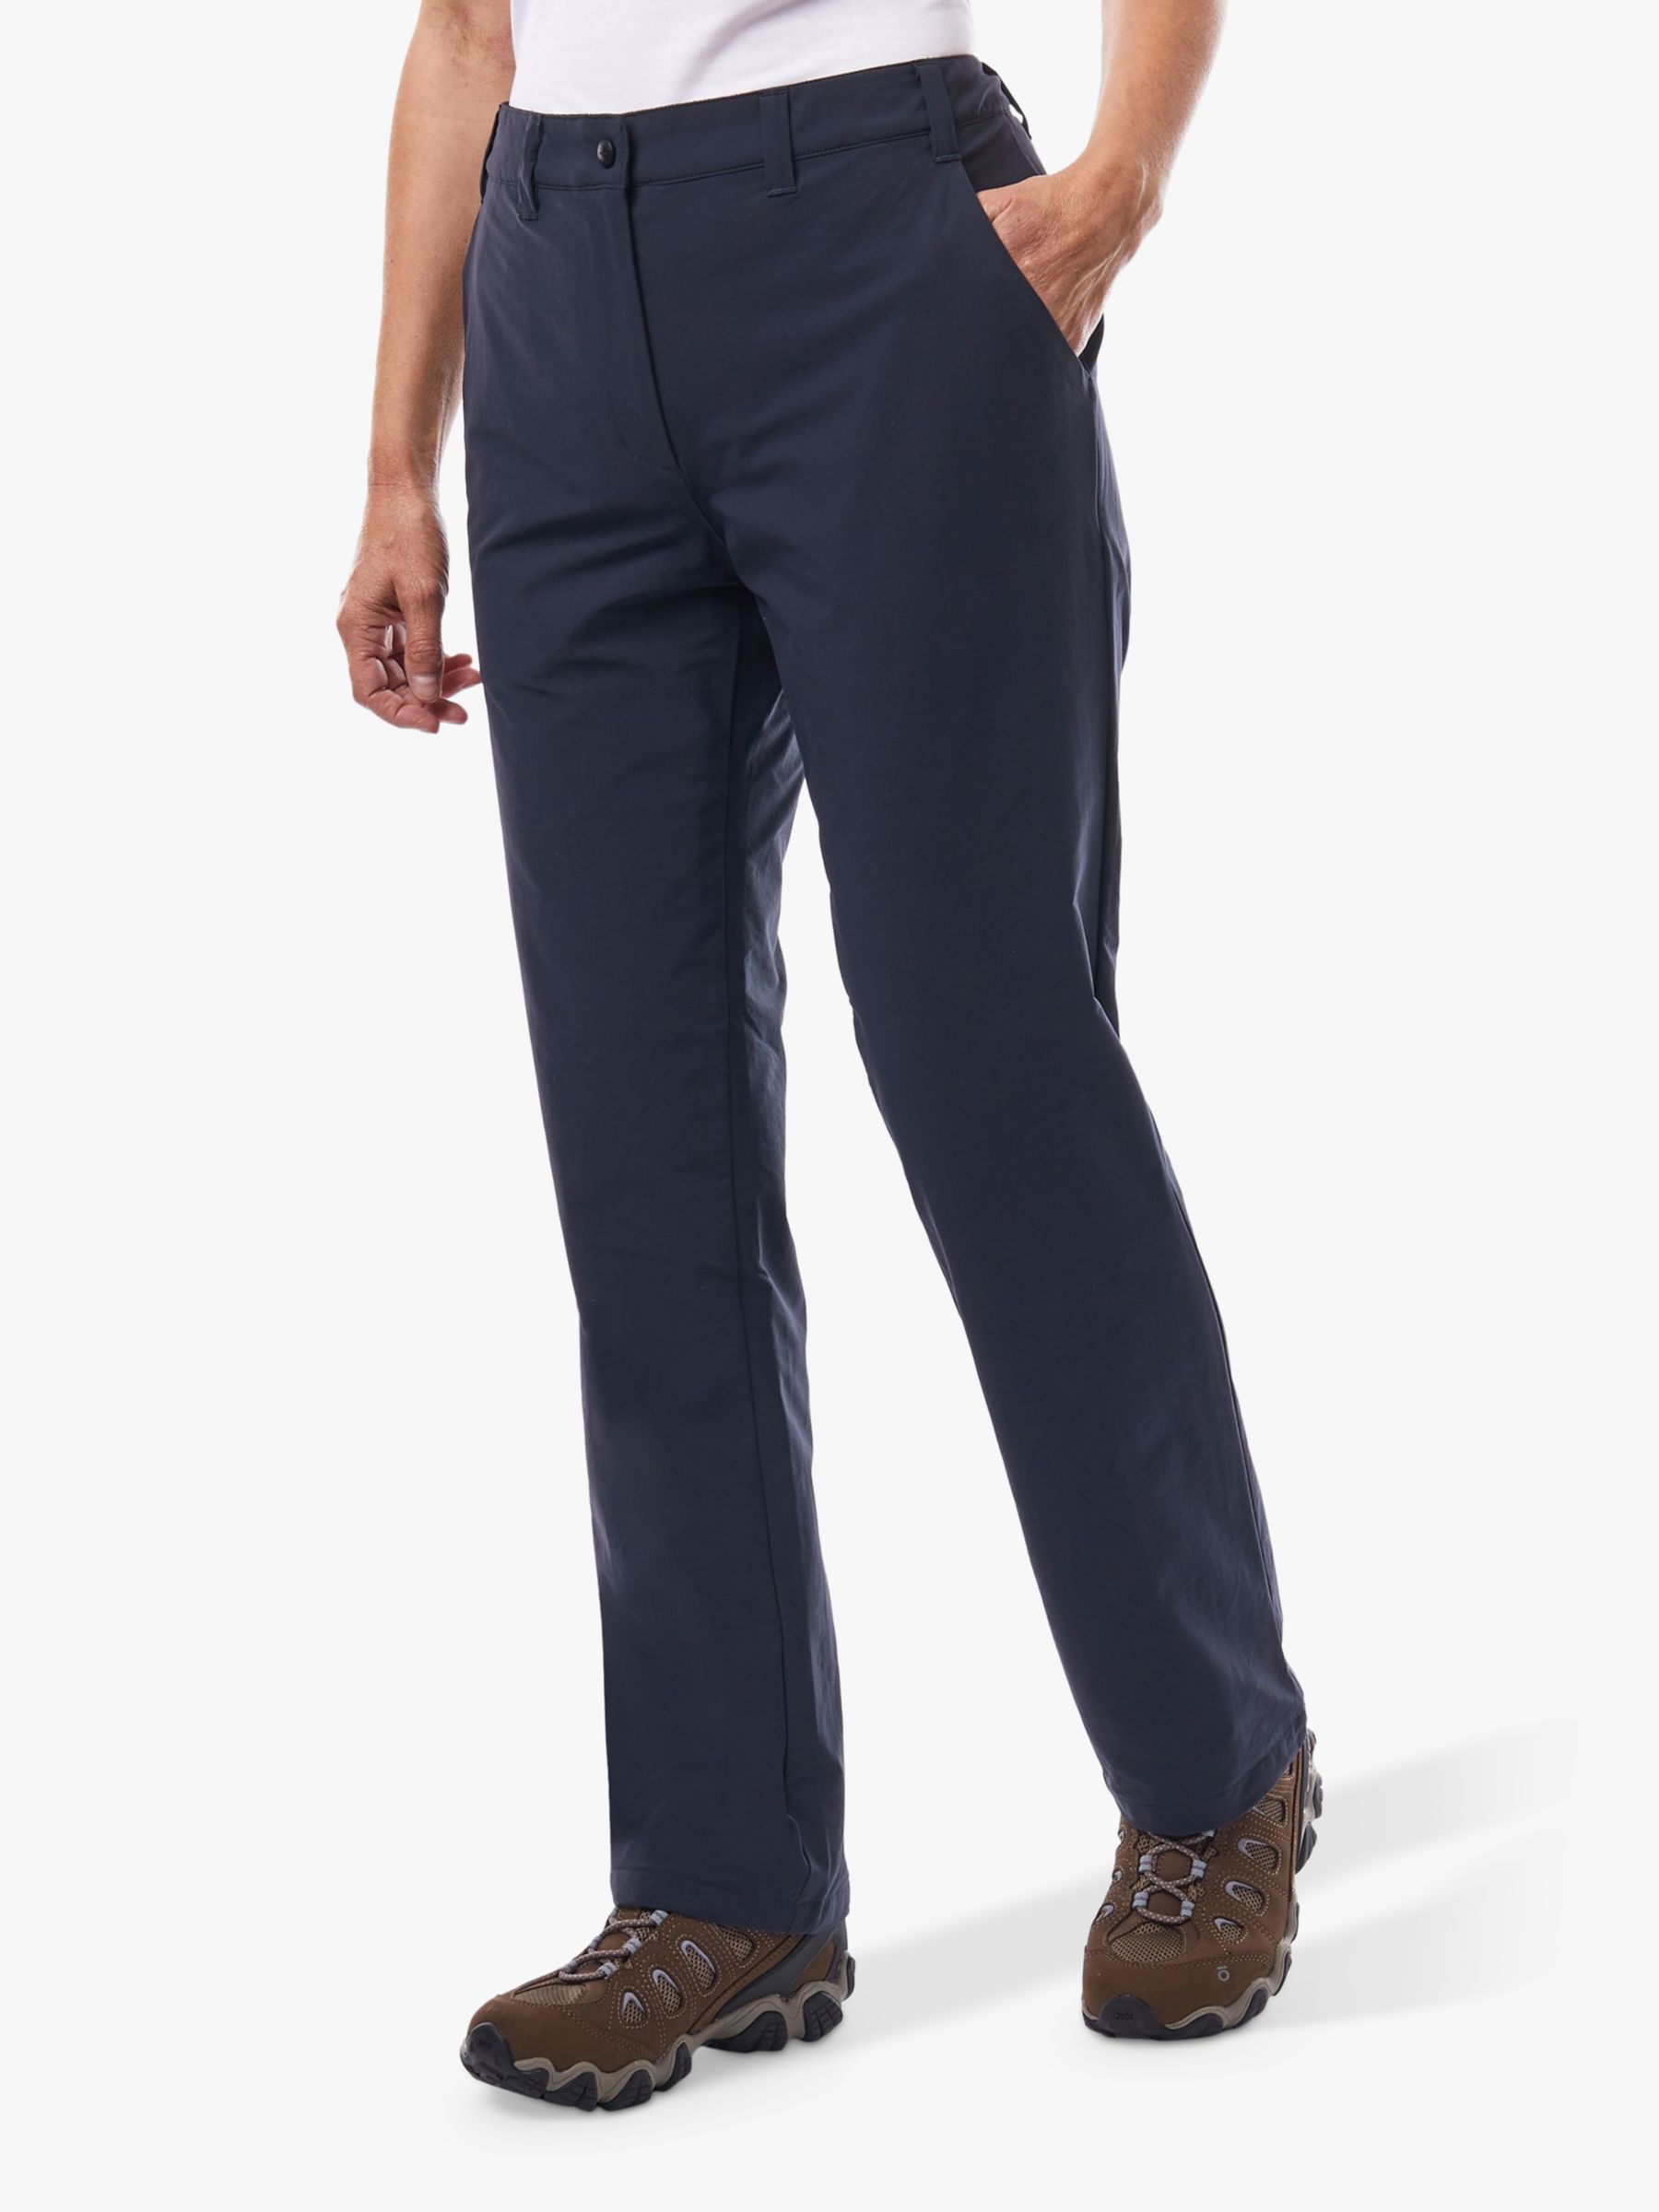 Women's Outdoor Trousers, Free Delivery